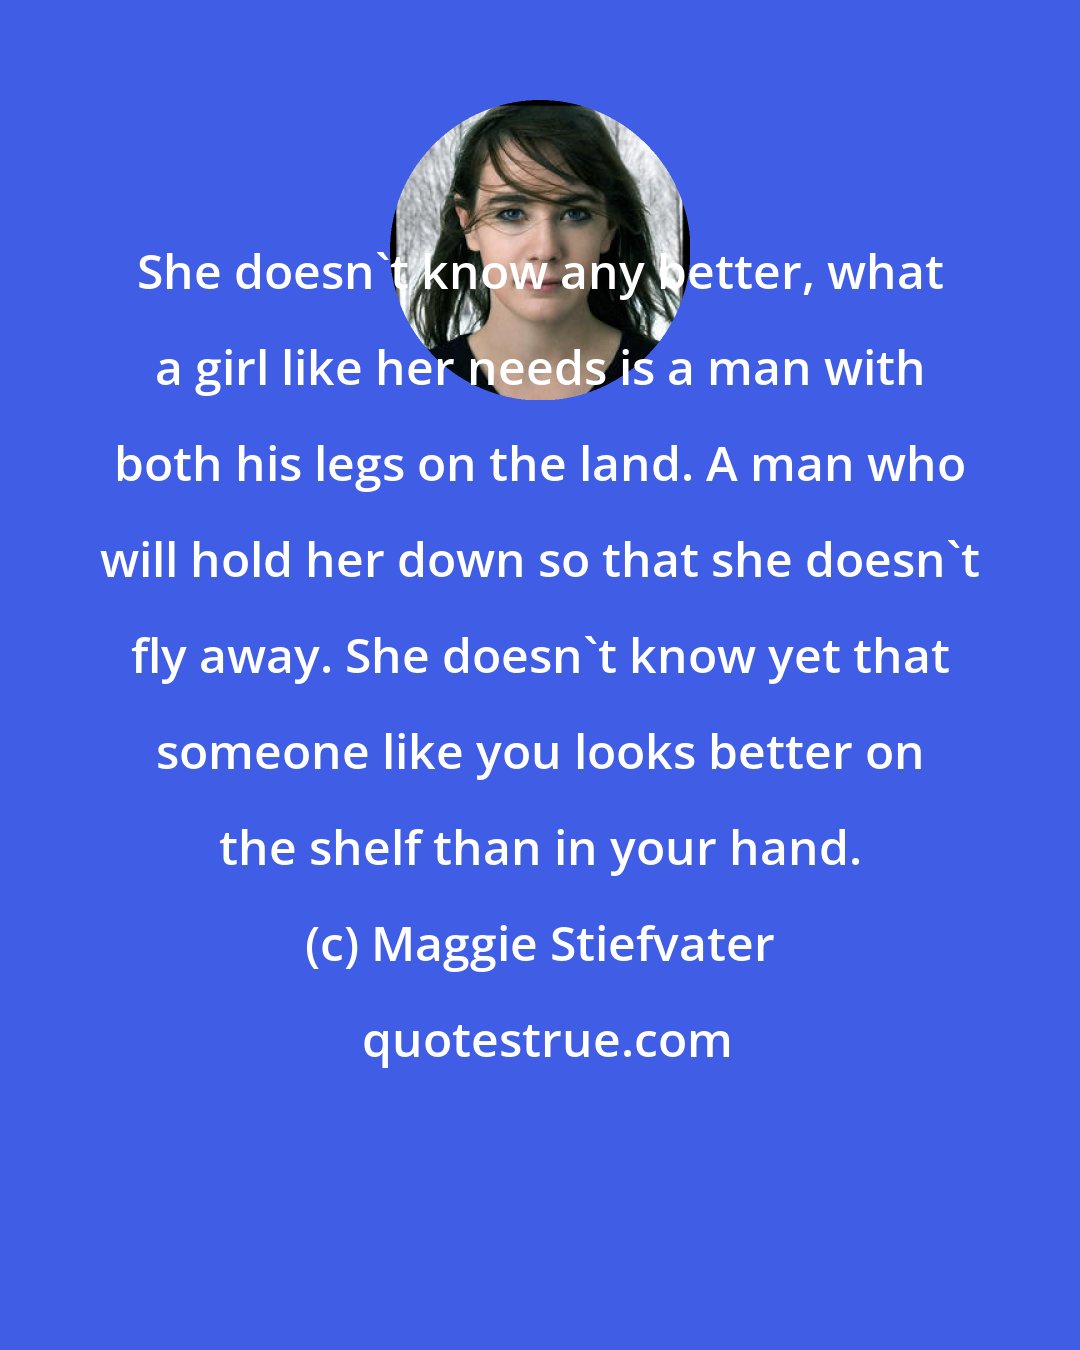 Maggie Stiefvater: She doesn't know any better, what a girl like her needs is a man with both his legs on the land. A man who will hold her down so that she doesn't fly away. She doesn't know yet that someone like you looks better on the shelf than in your hand.